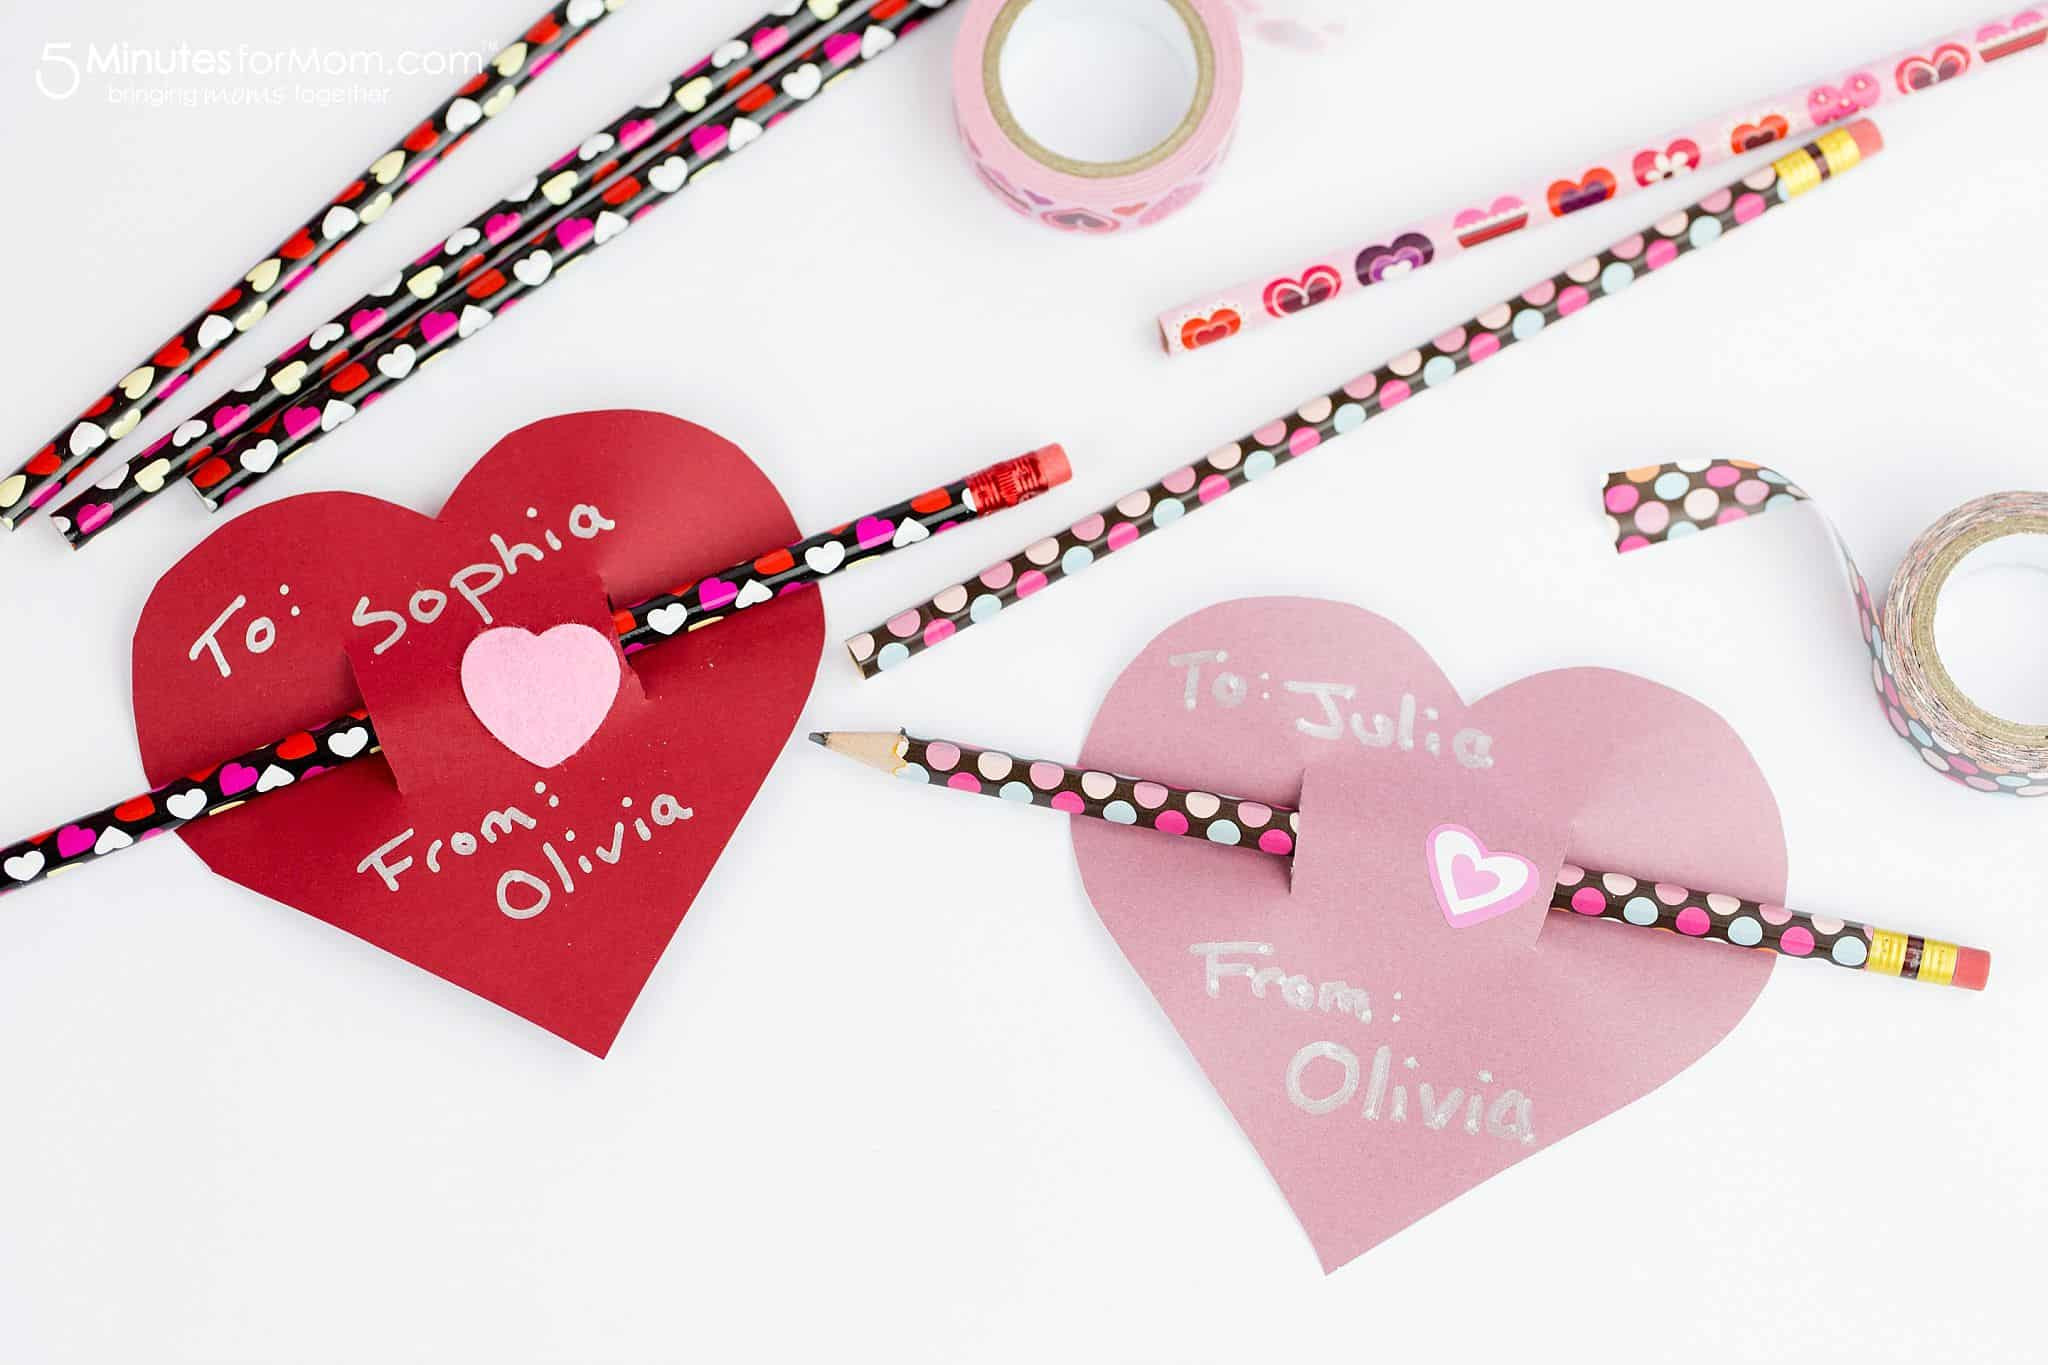 Valentine Gift Ideas For Mom
 Fast and Easy Dollar Store Valentine Ideas 5 Minutes for Mom